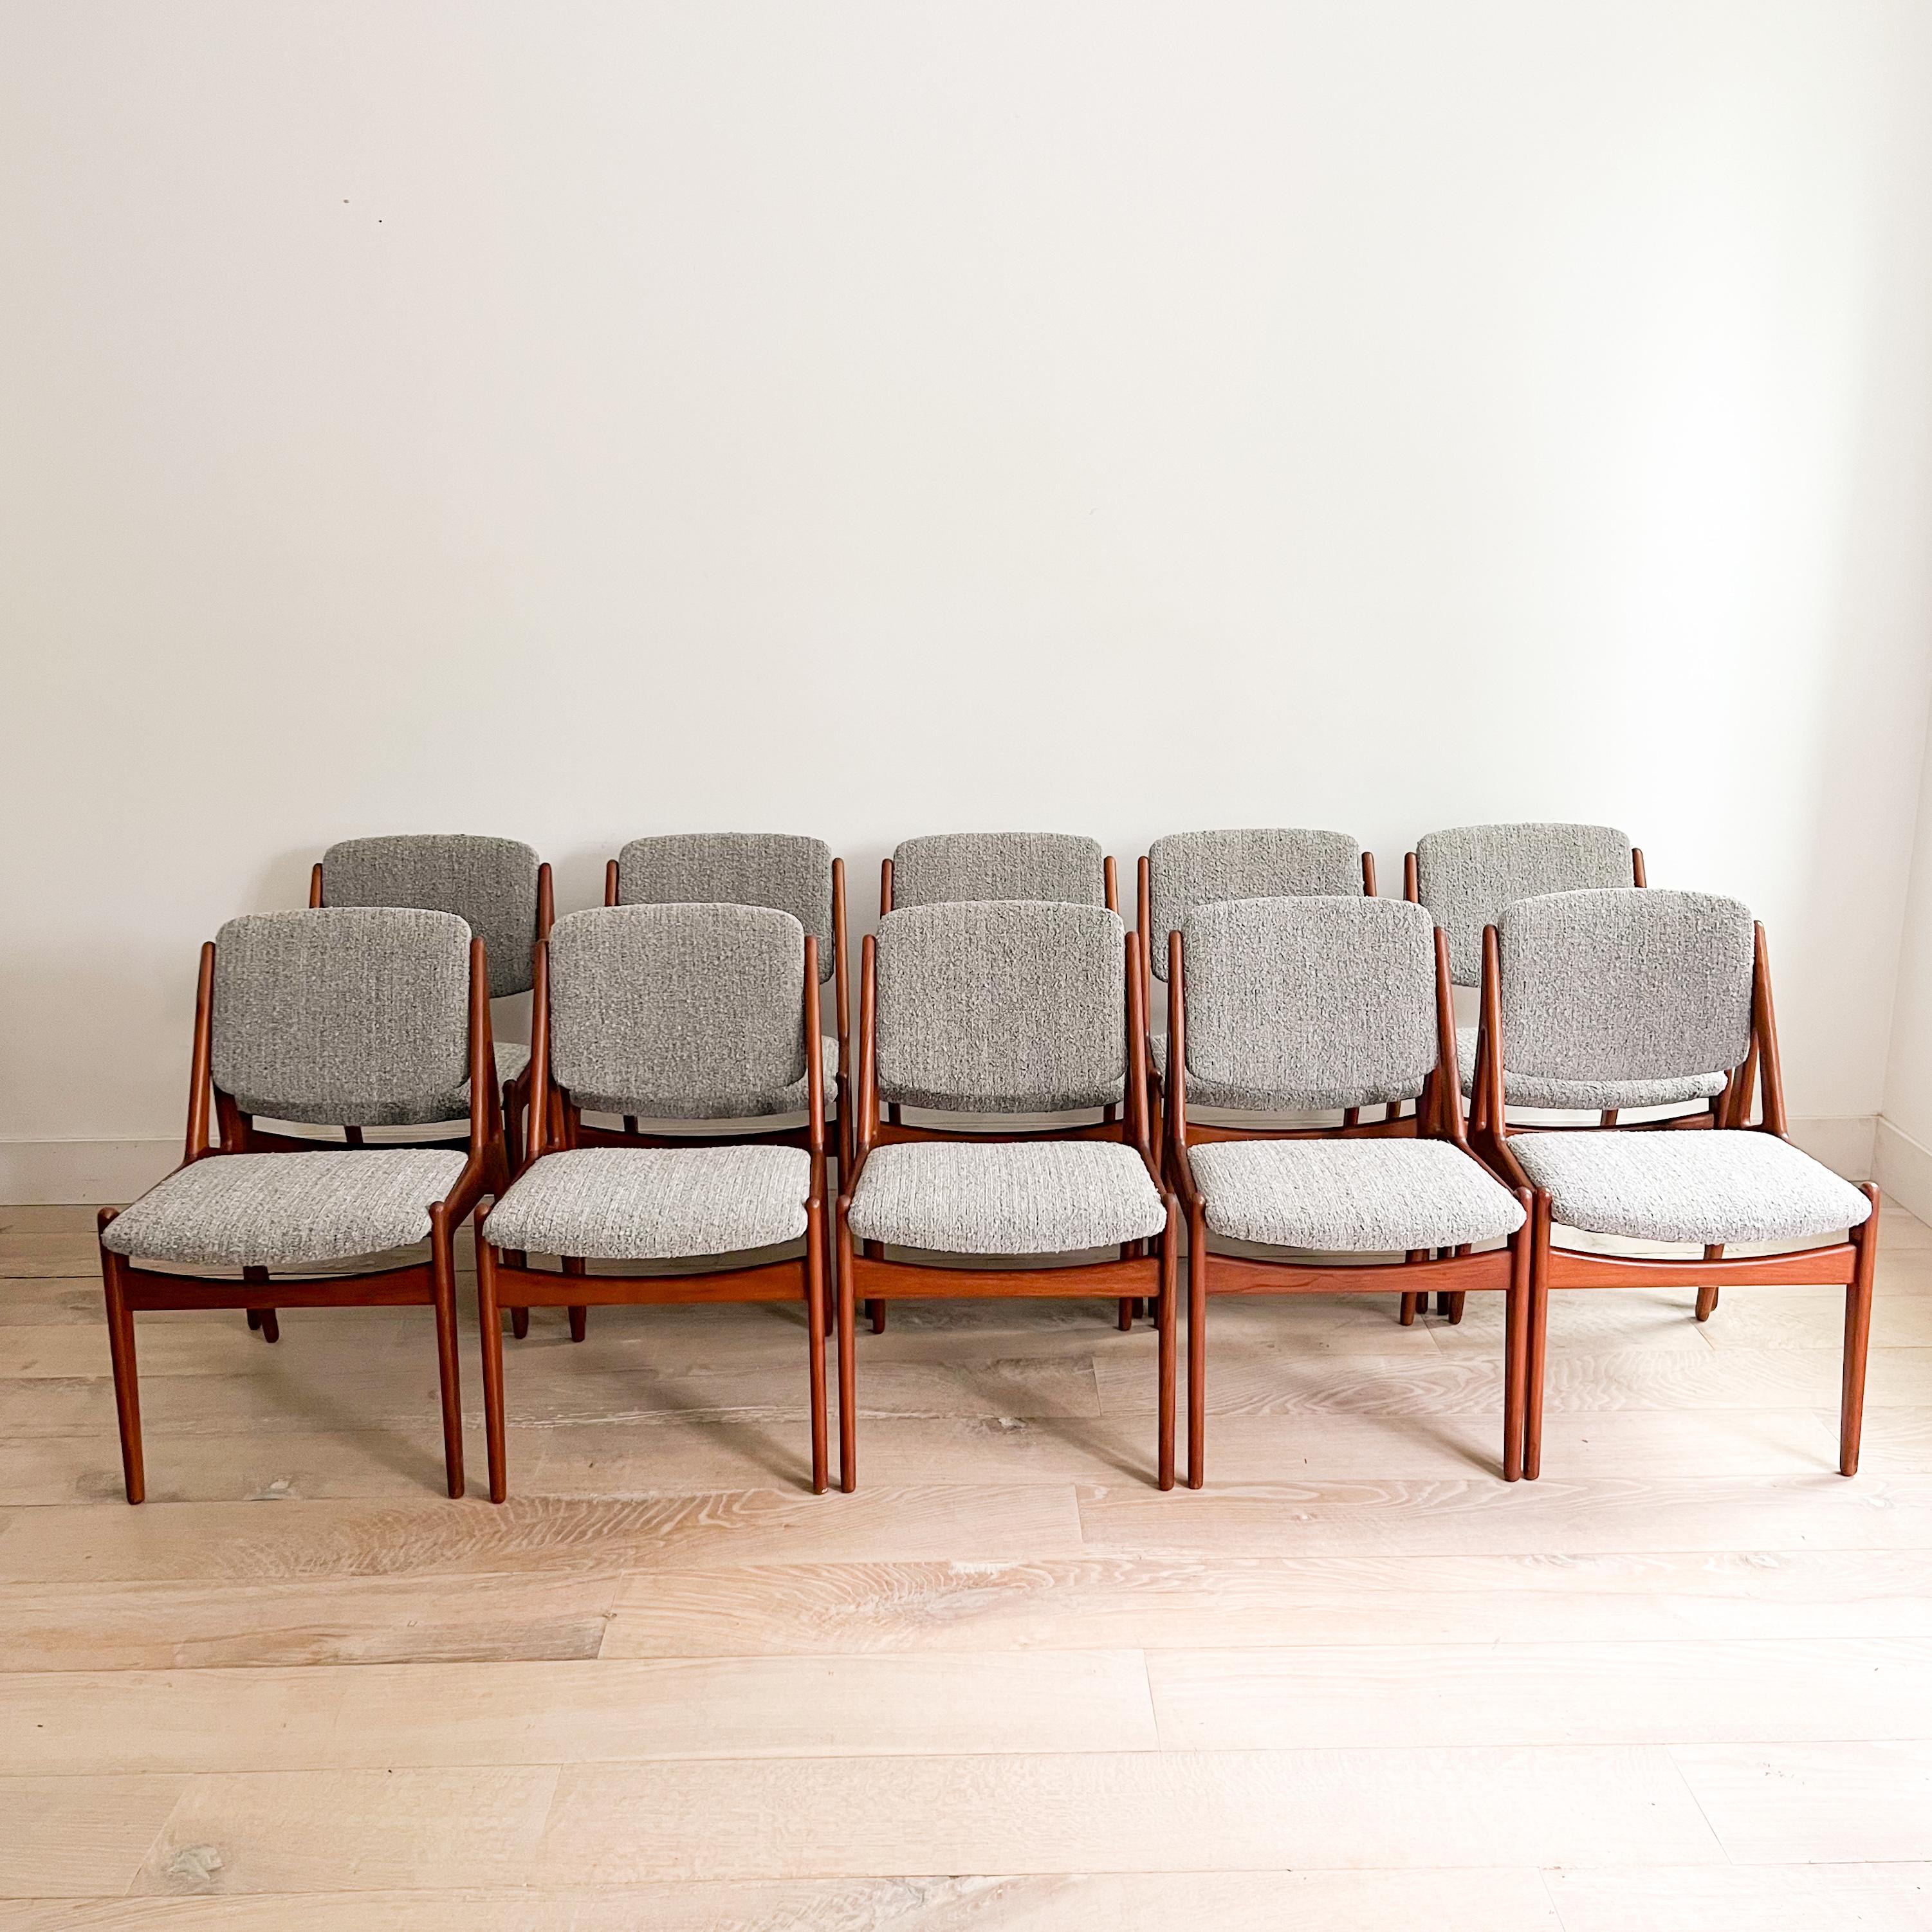 This rare set of 10 dining chairs by renowned designer Arne Vodder features elegant teak frames with a tilt-back design. Recently updated with new webbing, foam, and luxurious grey boucle upholstery, these chairs are incredibly comfortable. The teak